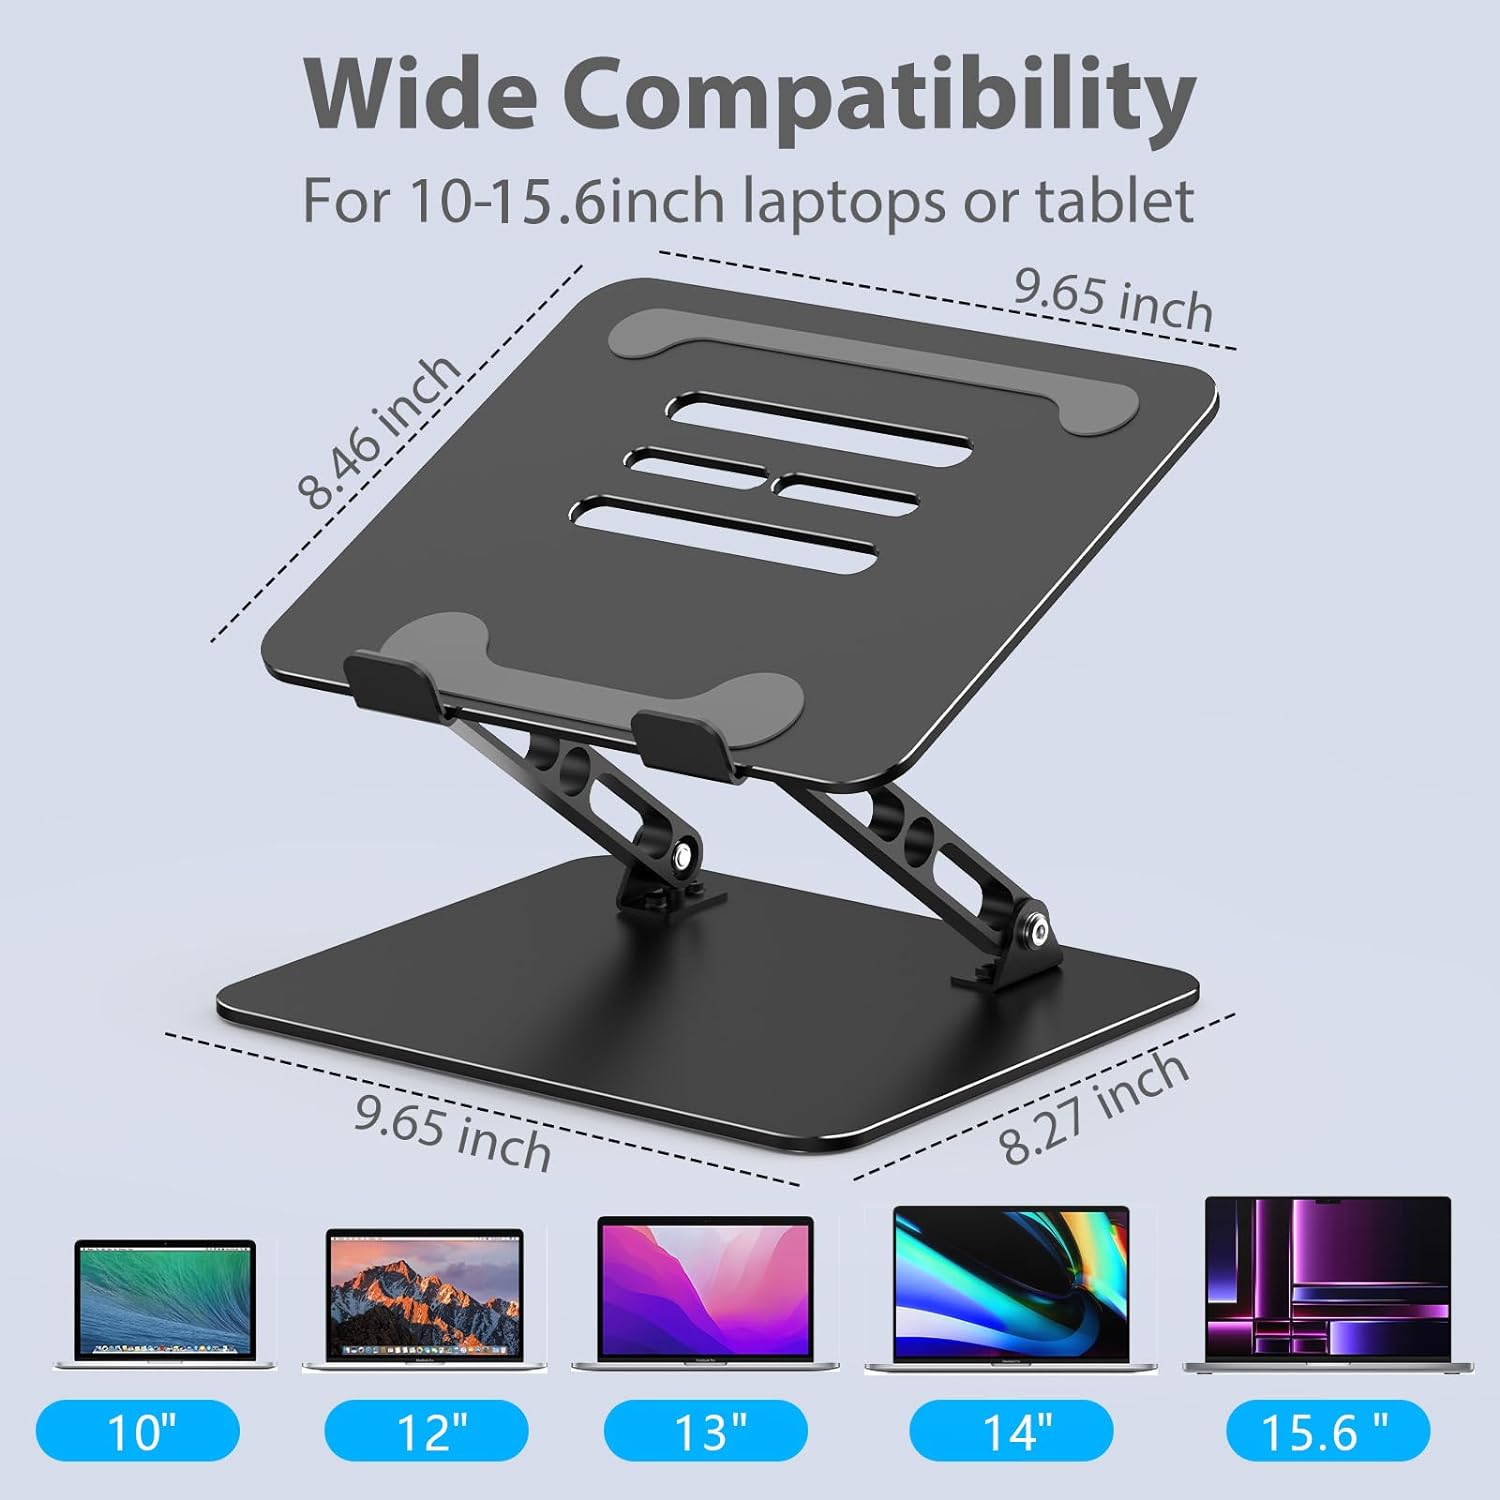 GOGOONIKE Ergonomic Adjustable Laptop Stand - Durable Metal Laptop Holder - With Ventilated Cooling - Macbook, Chromebook, Asus, Lenovo, Dell